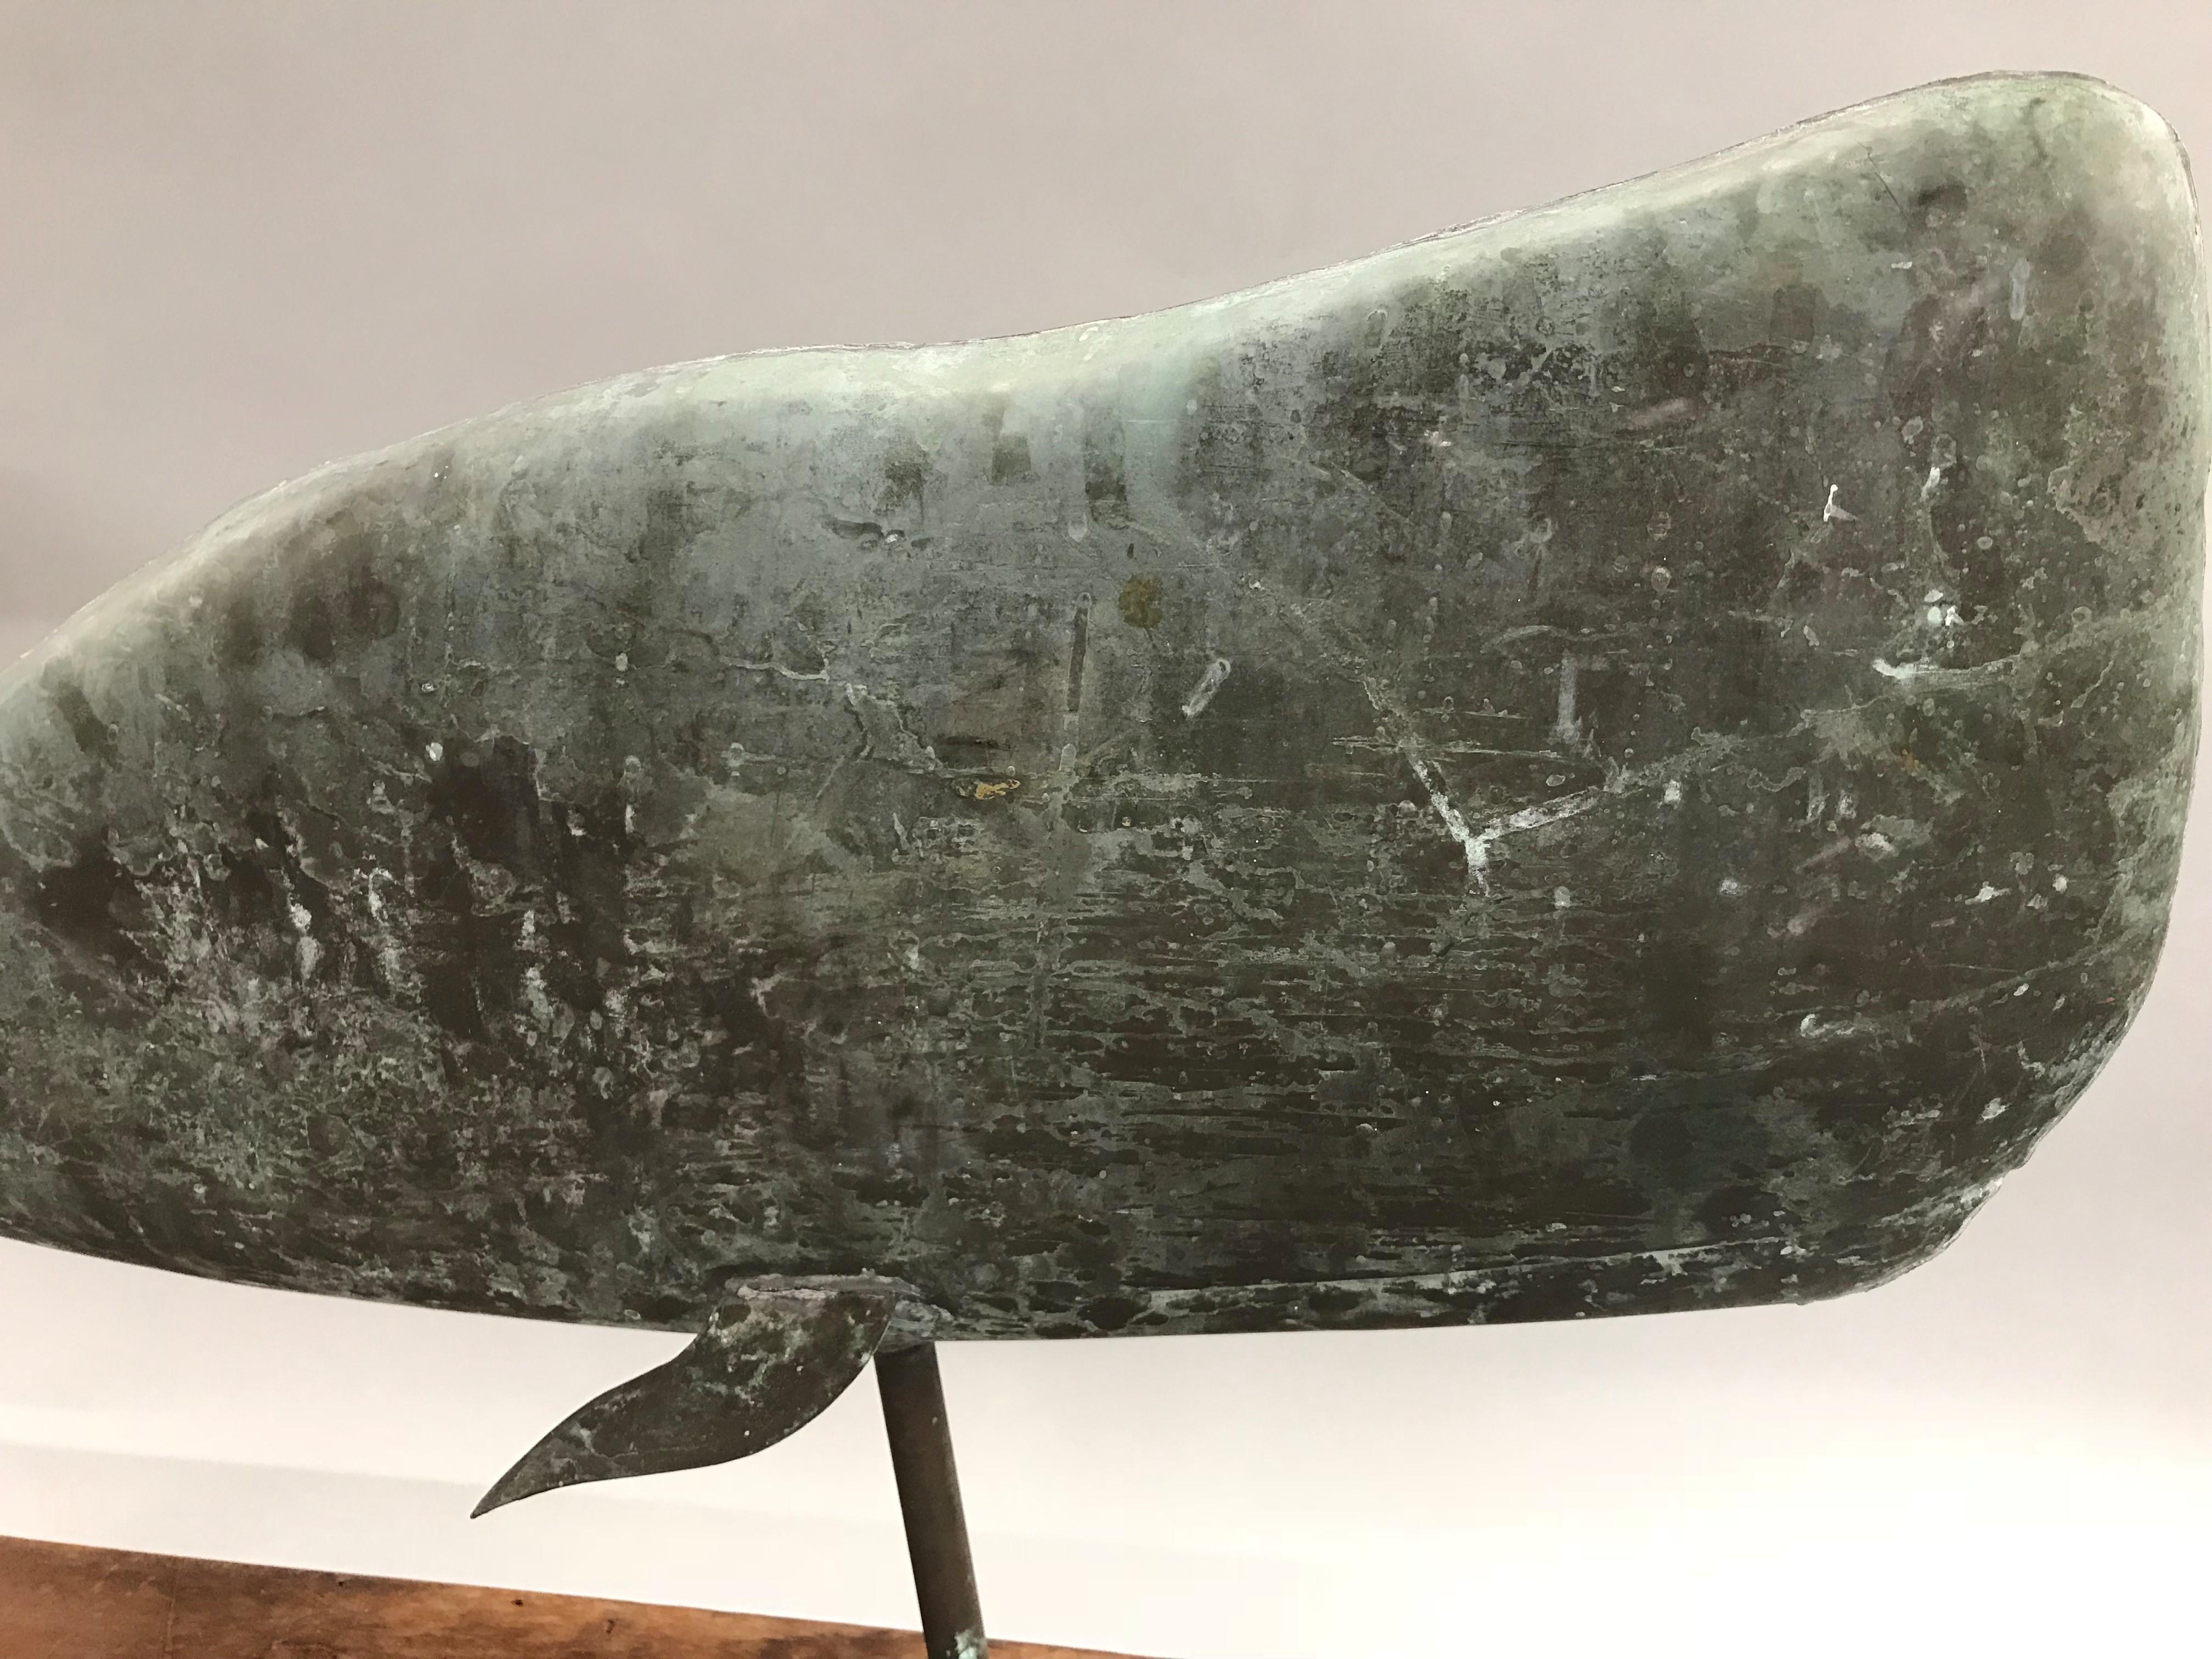 A fine example of a hollow copper whale form weathervane, mounted on a wooden stand, probably dating to the late 19th or early 20th century, in very good overall condition, with great patina and verdigris, with expected surface scratches and wear